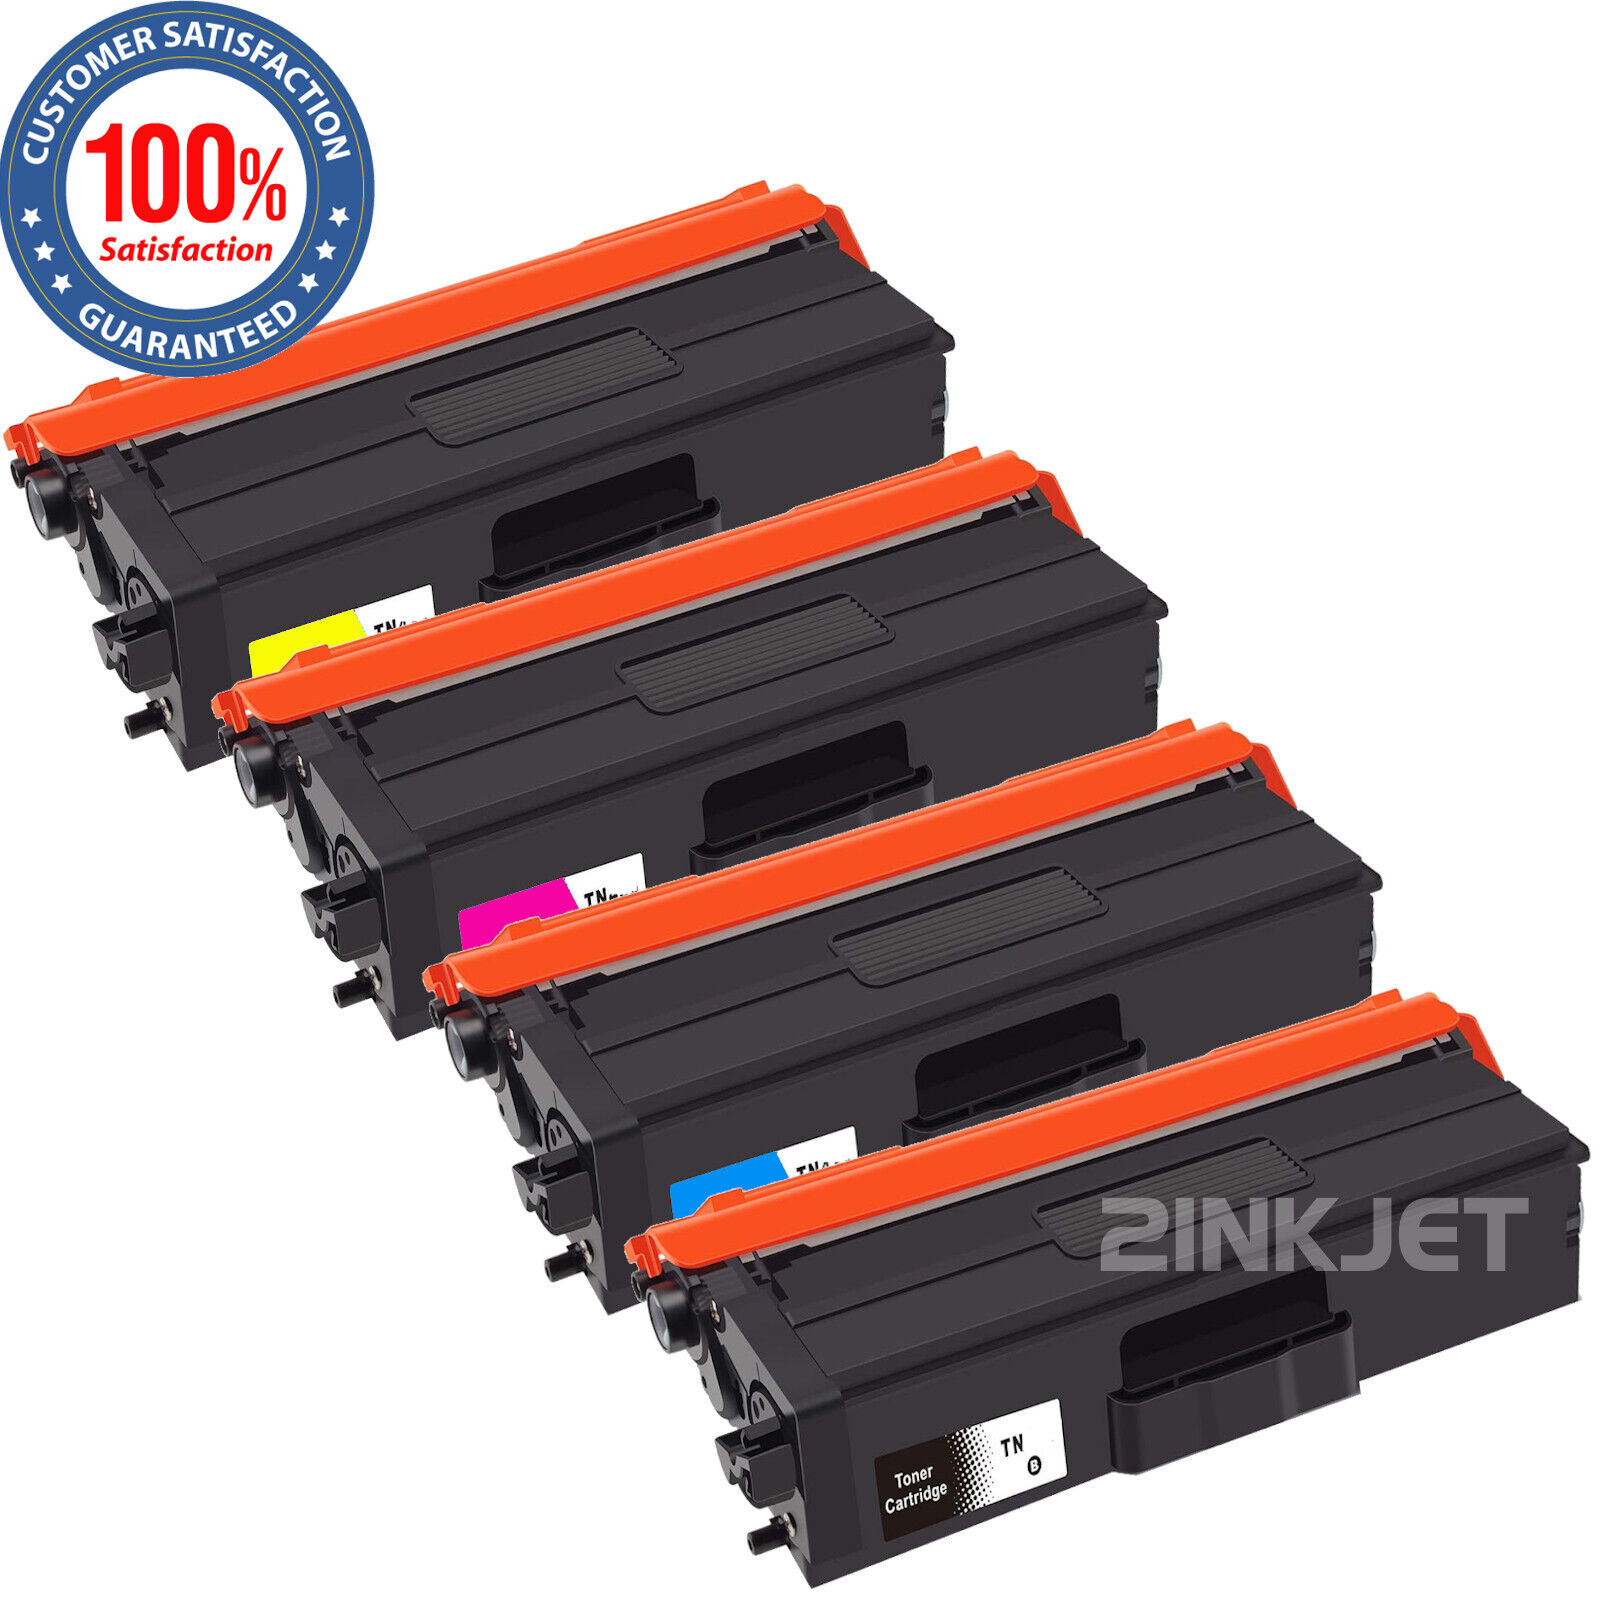 4PK Compatible With Brother TN315 Color Toner HL-4570cdw MFC-9970cdw MFC-9560cdw